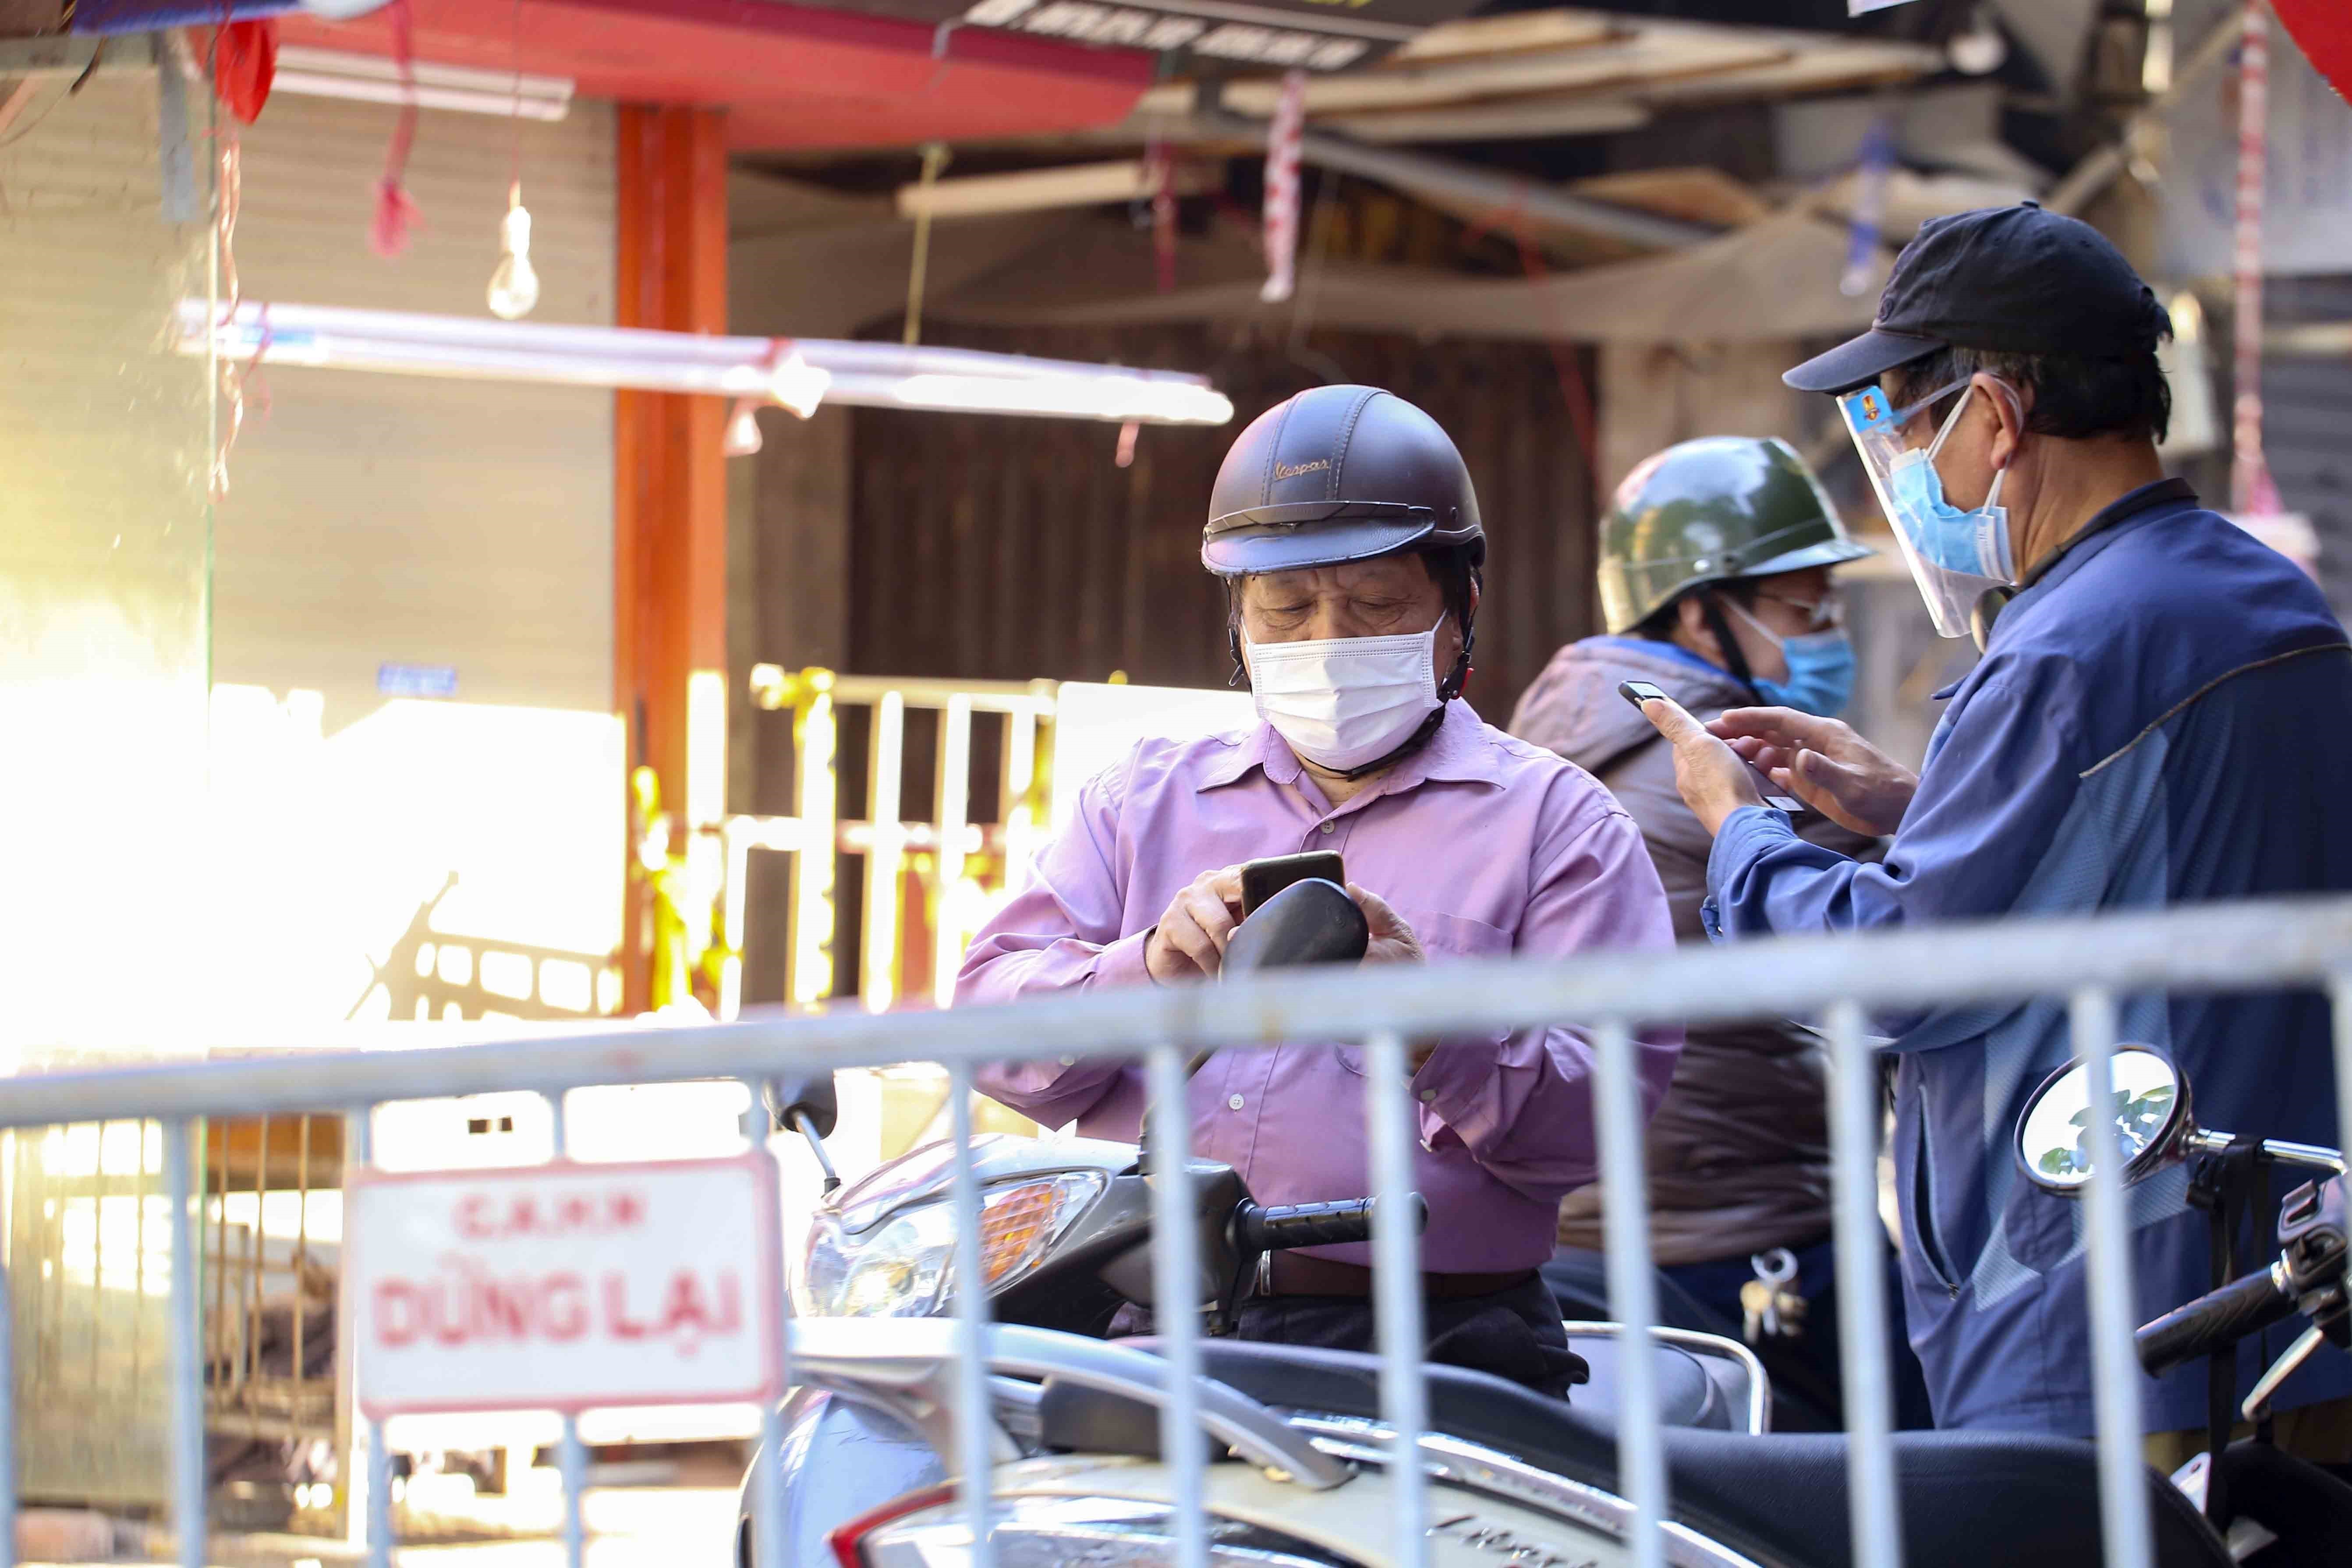 A functional force member checks a commuter for a health declaration on a smartphone at a COVID-19 checkpoint near Nguyen Cong Tru Market in Pho Hue Ward, Hai Ba Trung District, Hanoi, December 5, 2021. Photo: Vietnam News Agency